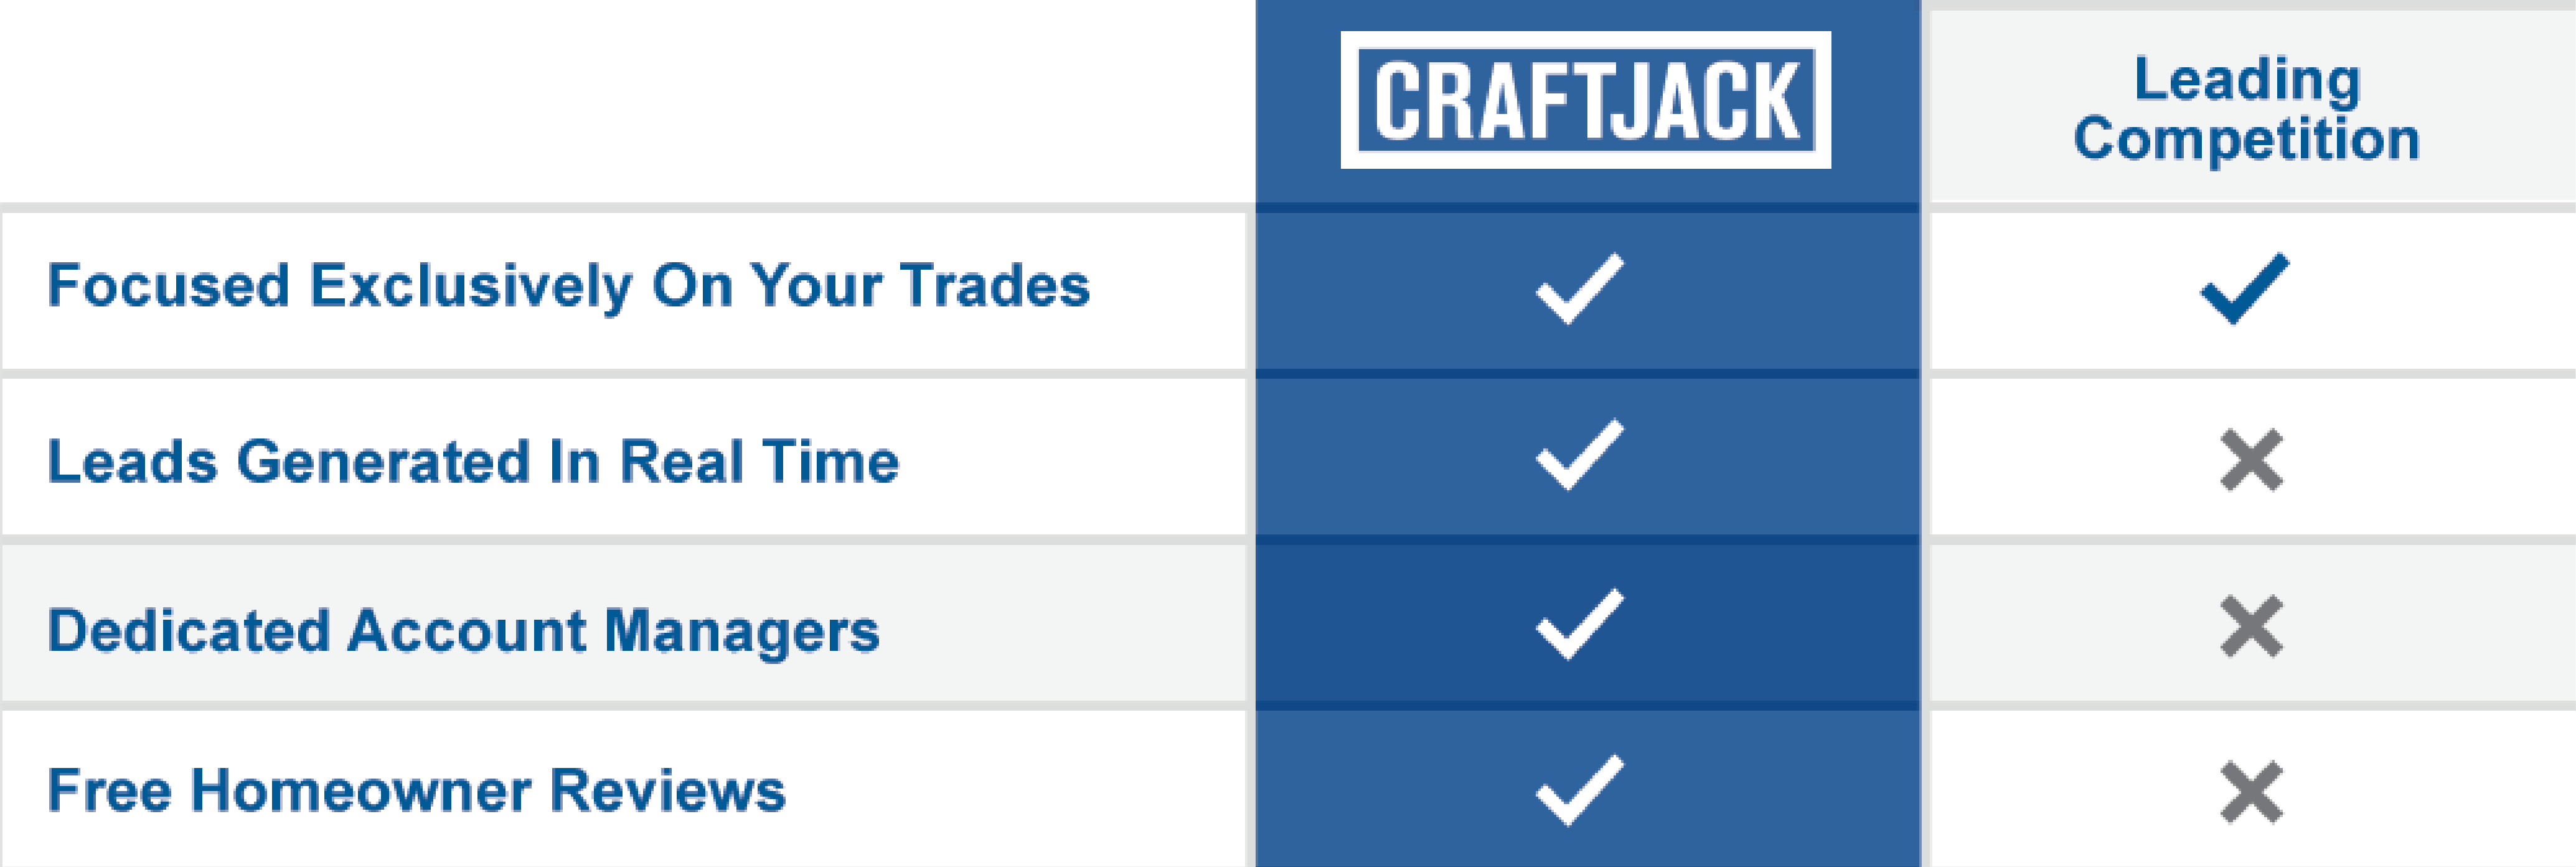 How Is CraftJack Different Than Other Lead Generation Companies?